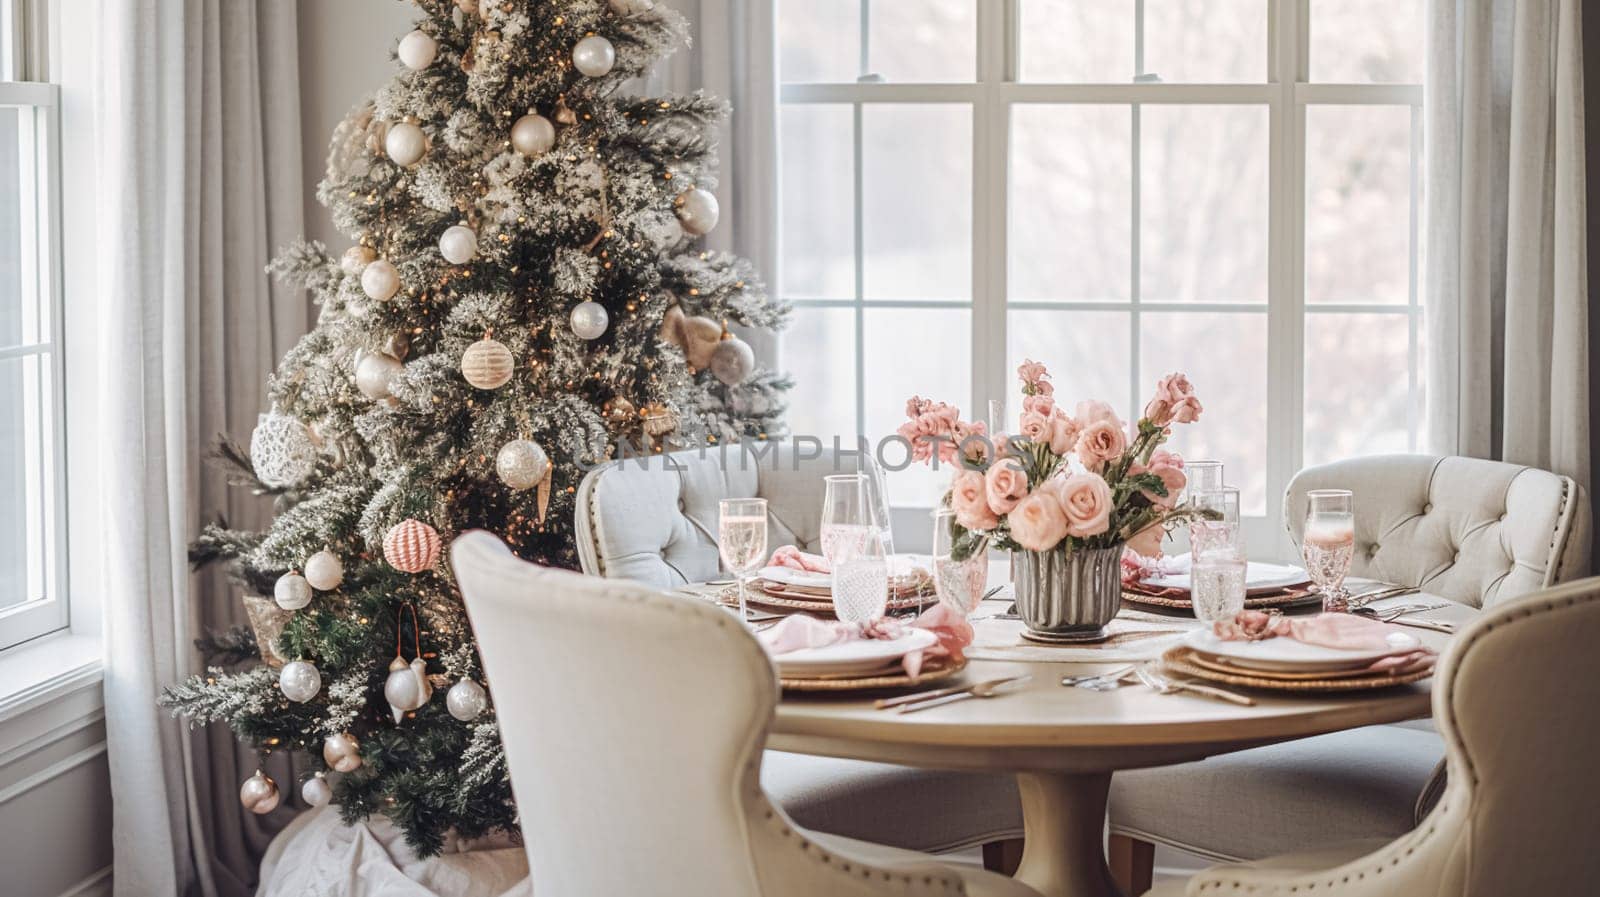 Table decor for festive family dinner at home, holiday tablescape and table setting, formal for wedding, celebration, English countryside and home styling